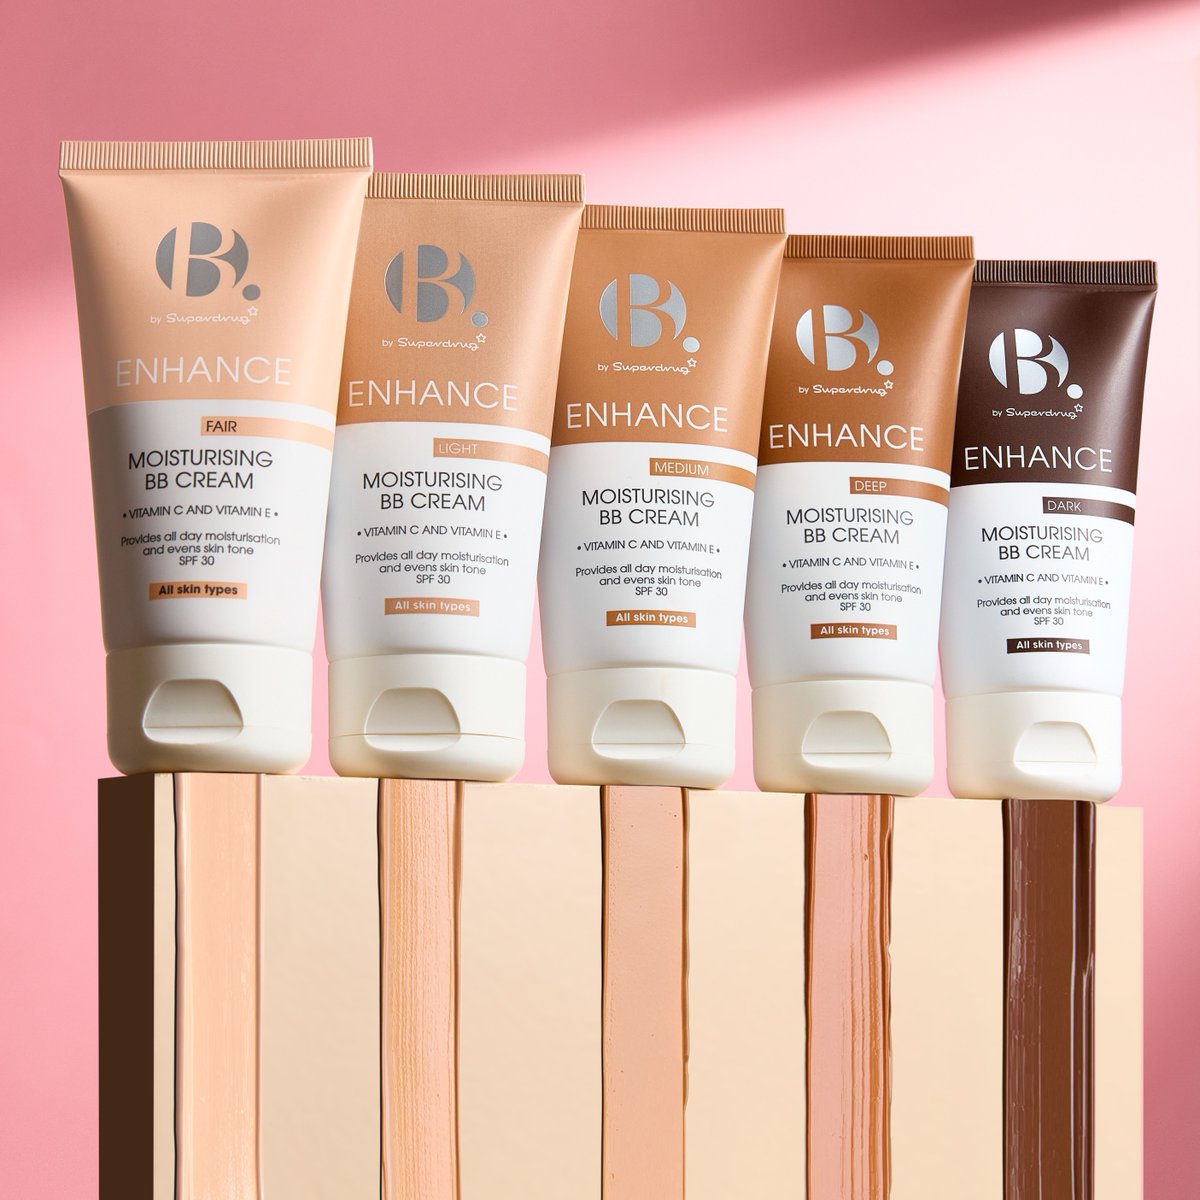 Protect and enhance your natural complexion with the NEW @bbysuperdrug Superdrug BB Creams 🩷 This lightweight, illuminating BB cream will give you a healthy glow and includes SPF 30 protection ✨ Shop now: buff.ly/3UxeJF6 #bbysuperdrug